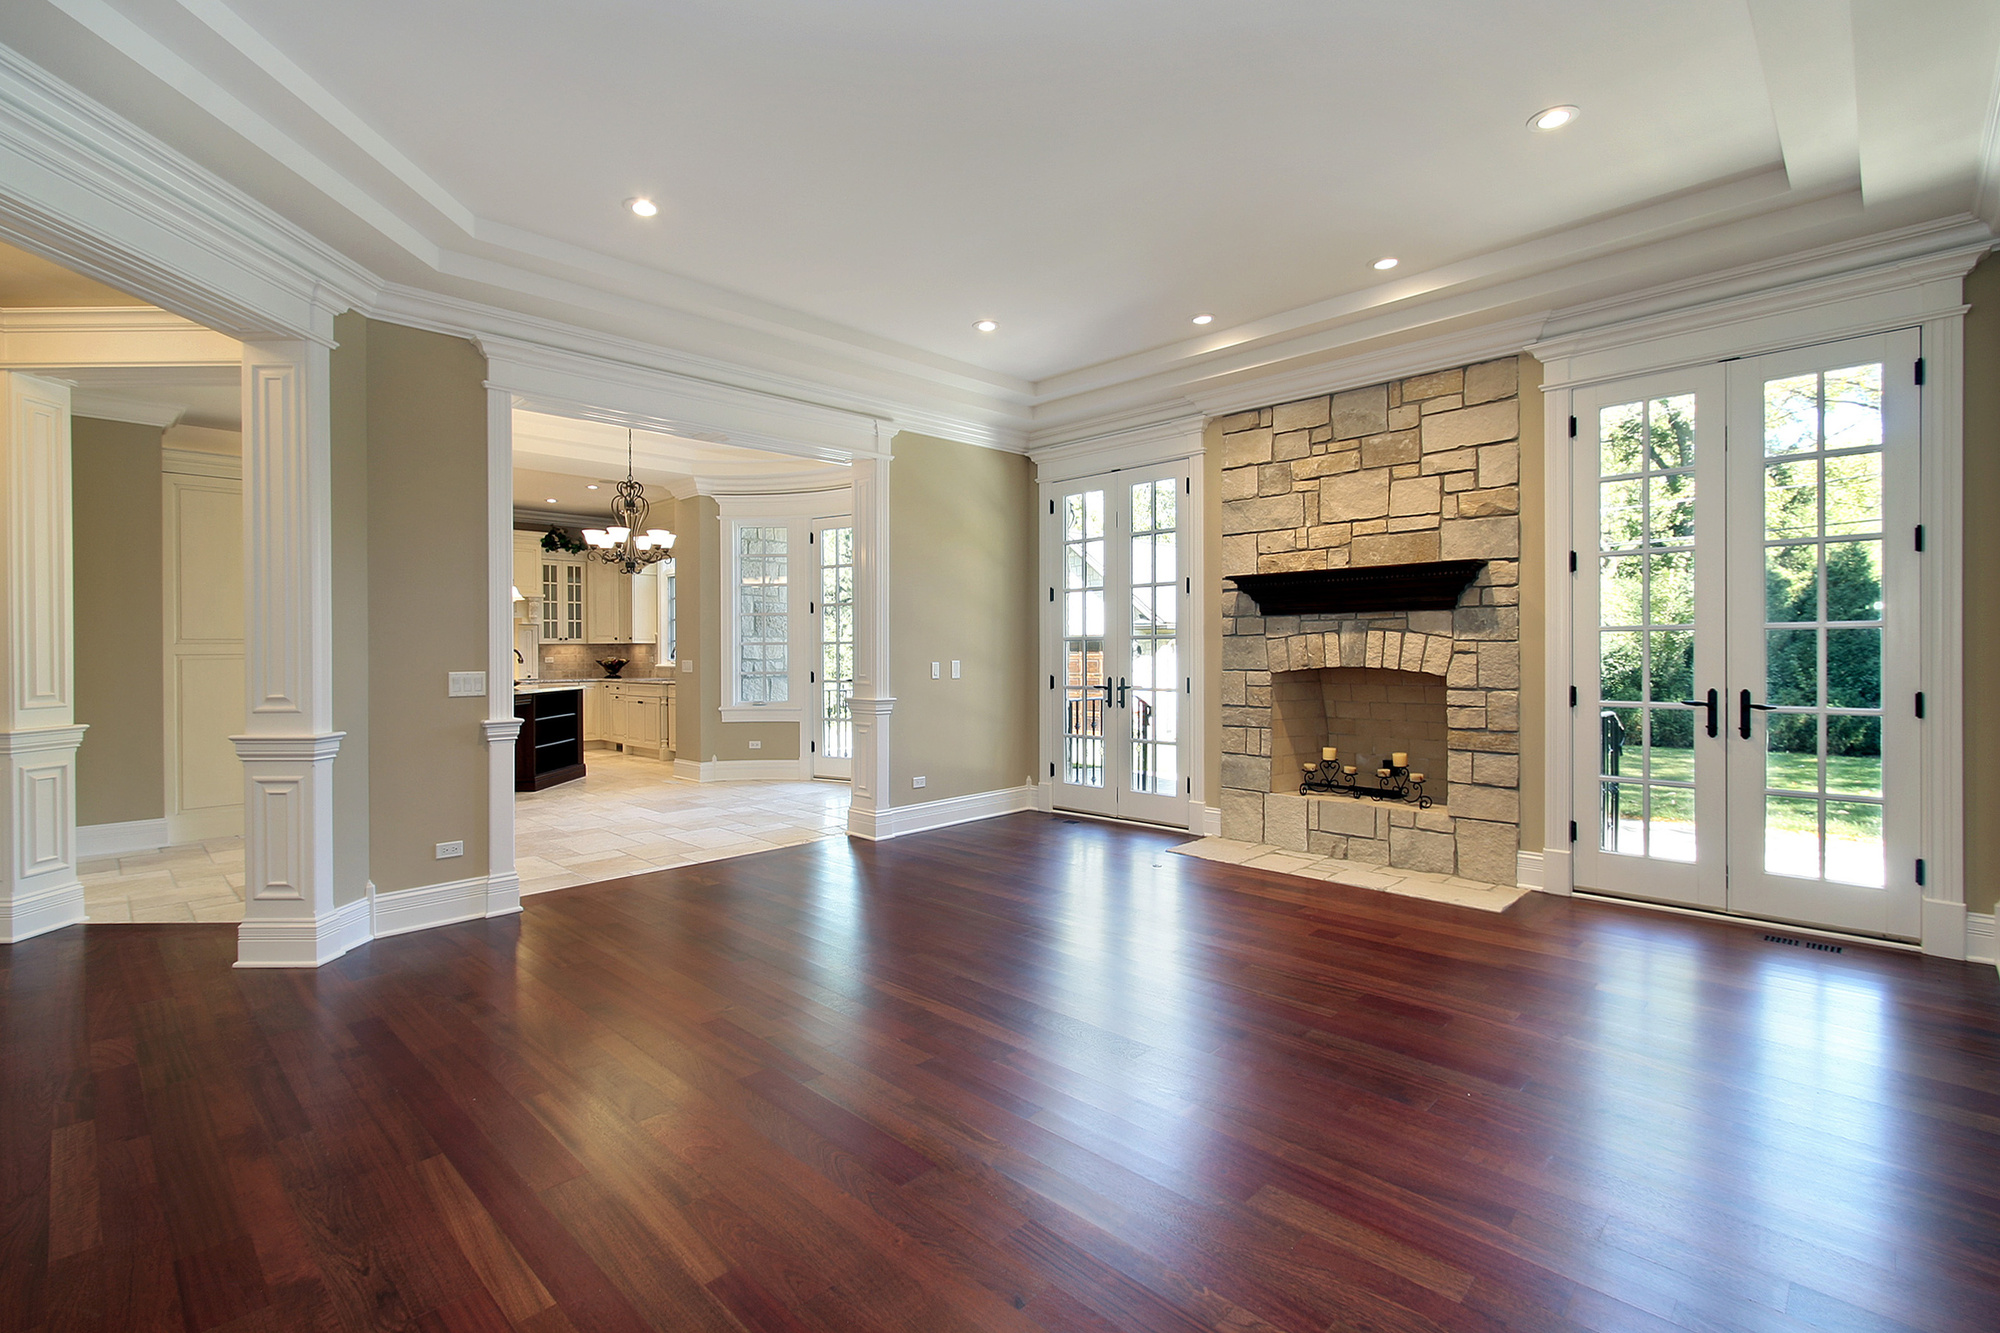 3 Factors to Consider Before Installing Wood Floors in Your Home